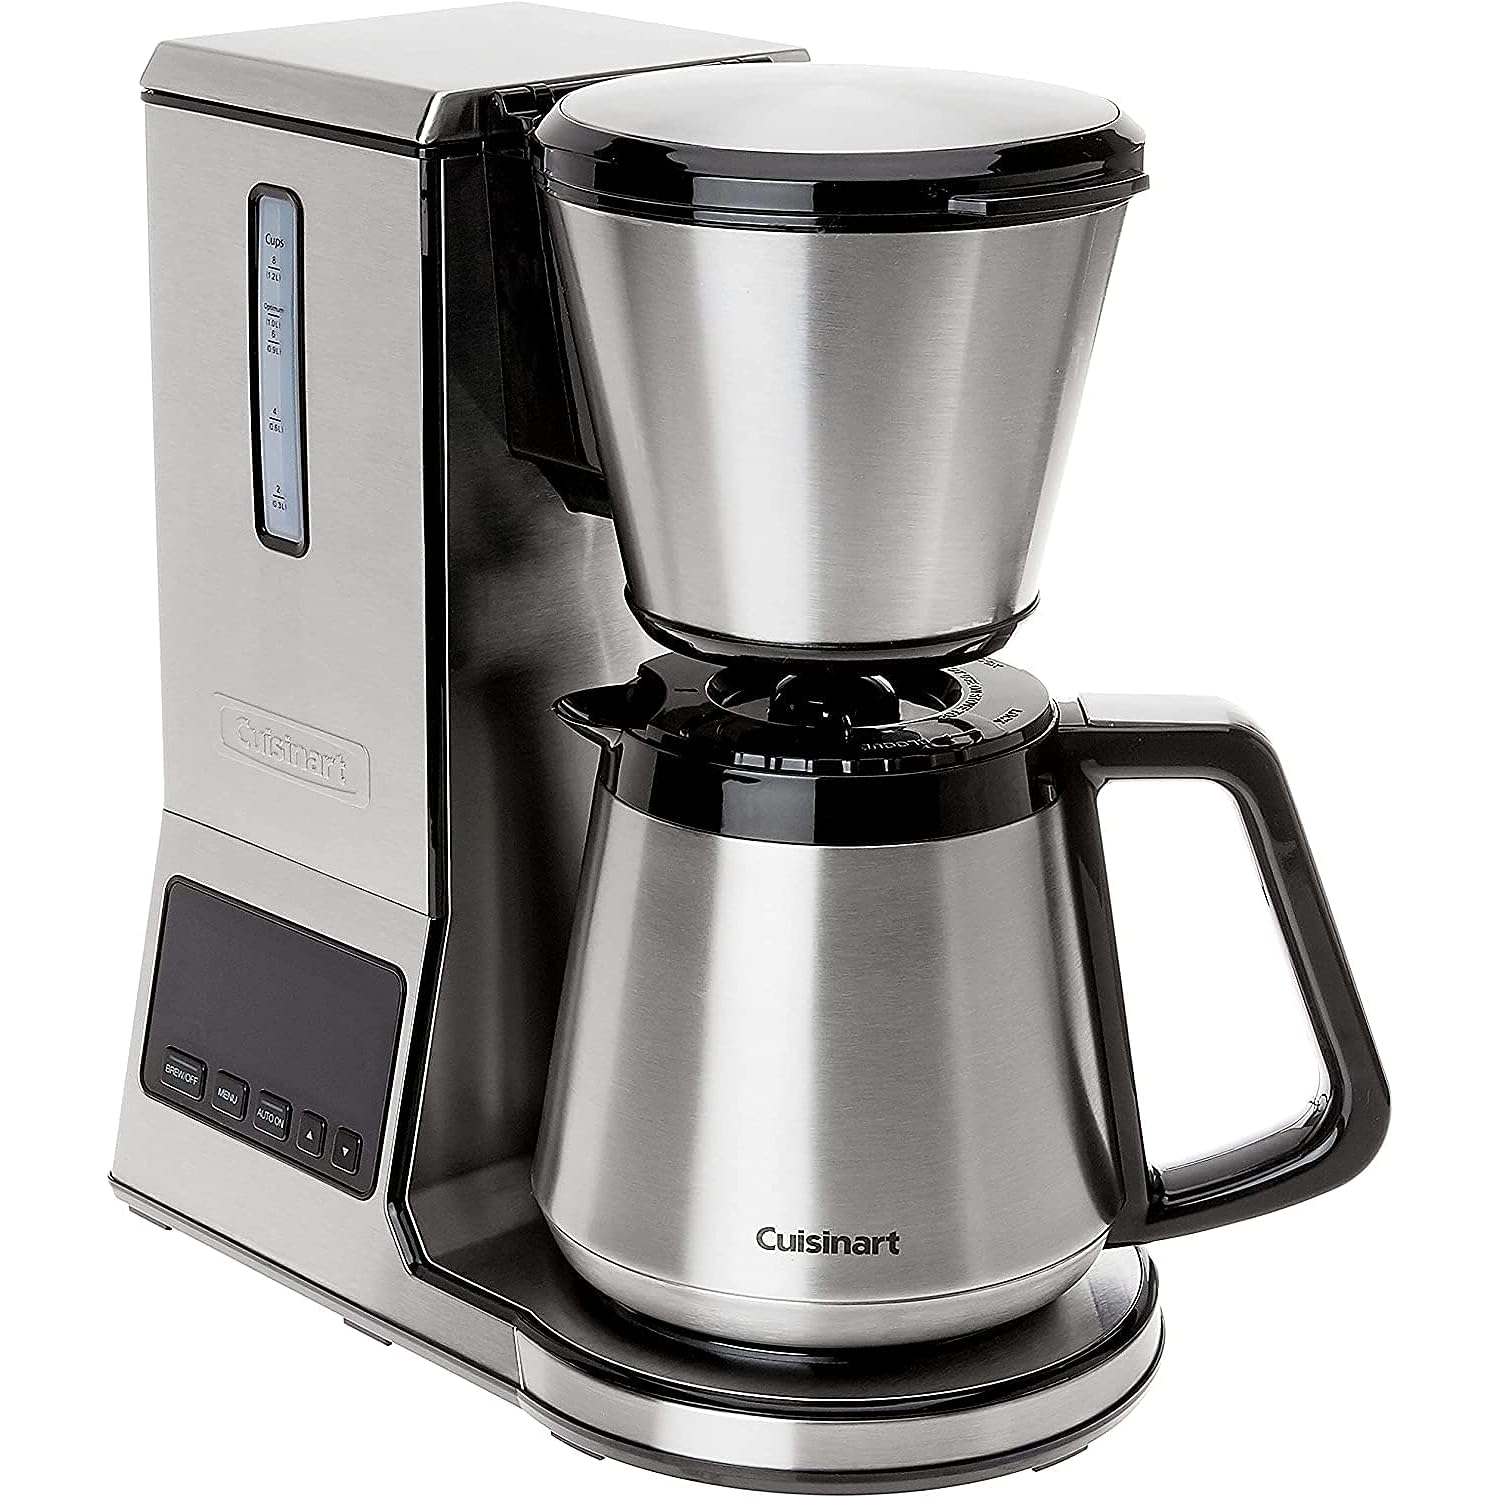 Cuisinart Cpo850 Coffee Brewer, 8 Cup, Stainless Steel